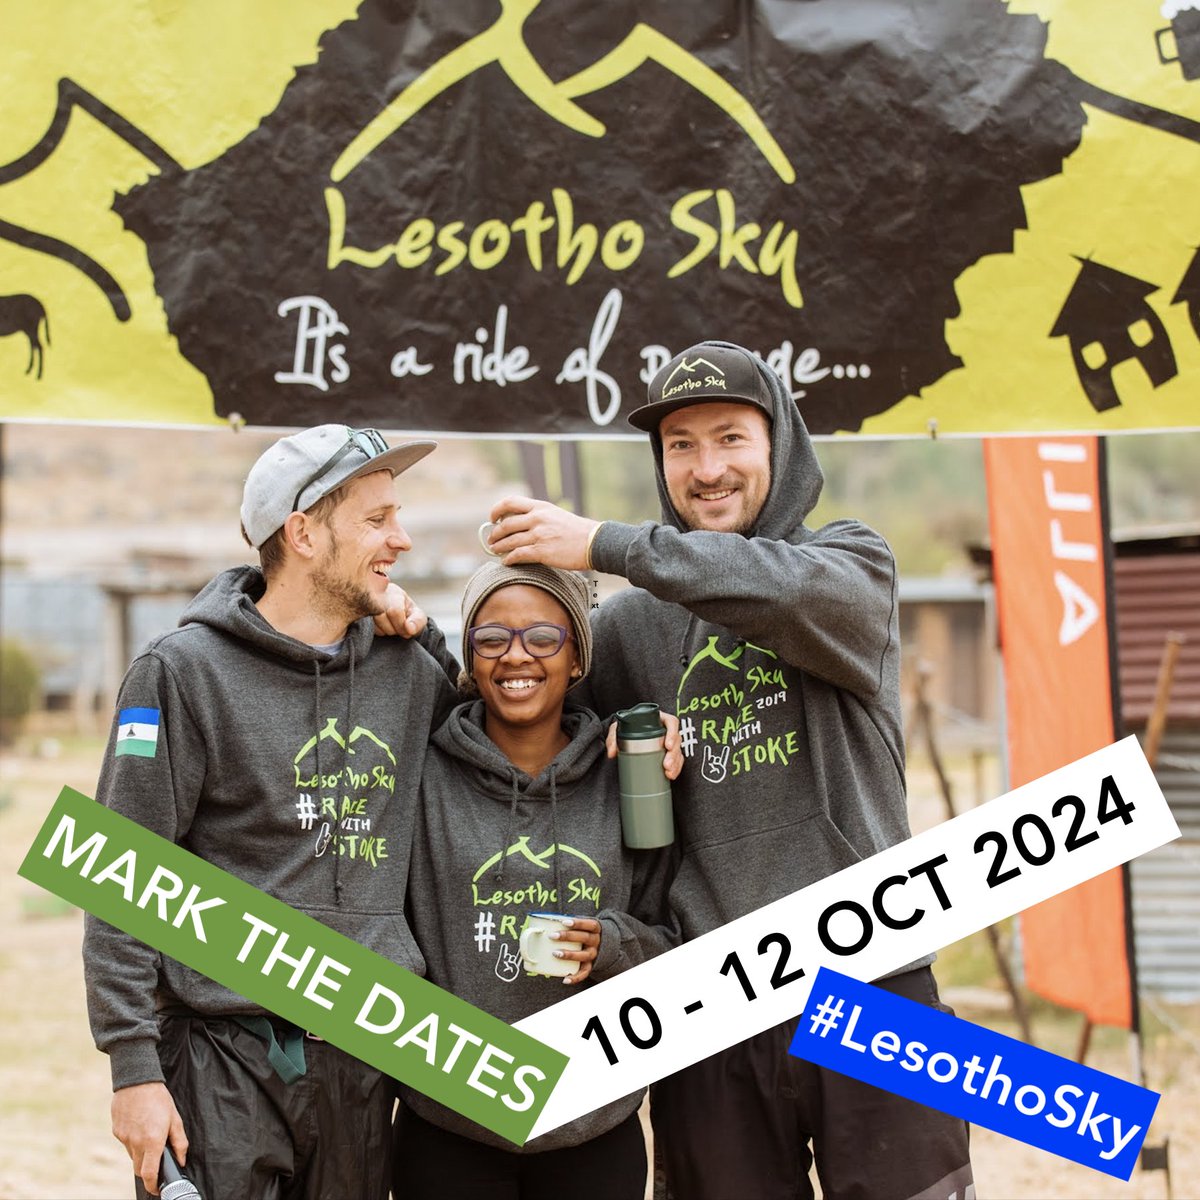 LesothoSky on X: "We've got news from your favourite MTB destination in Africa 🇱🇸 💚 Lesotho Sky is back this year and we're amped for a very special edition ahead with new